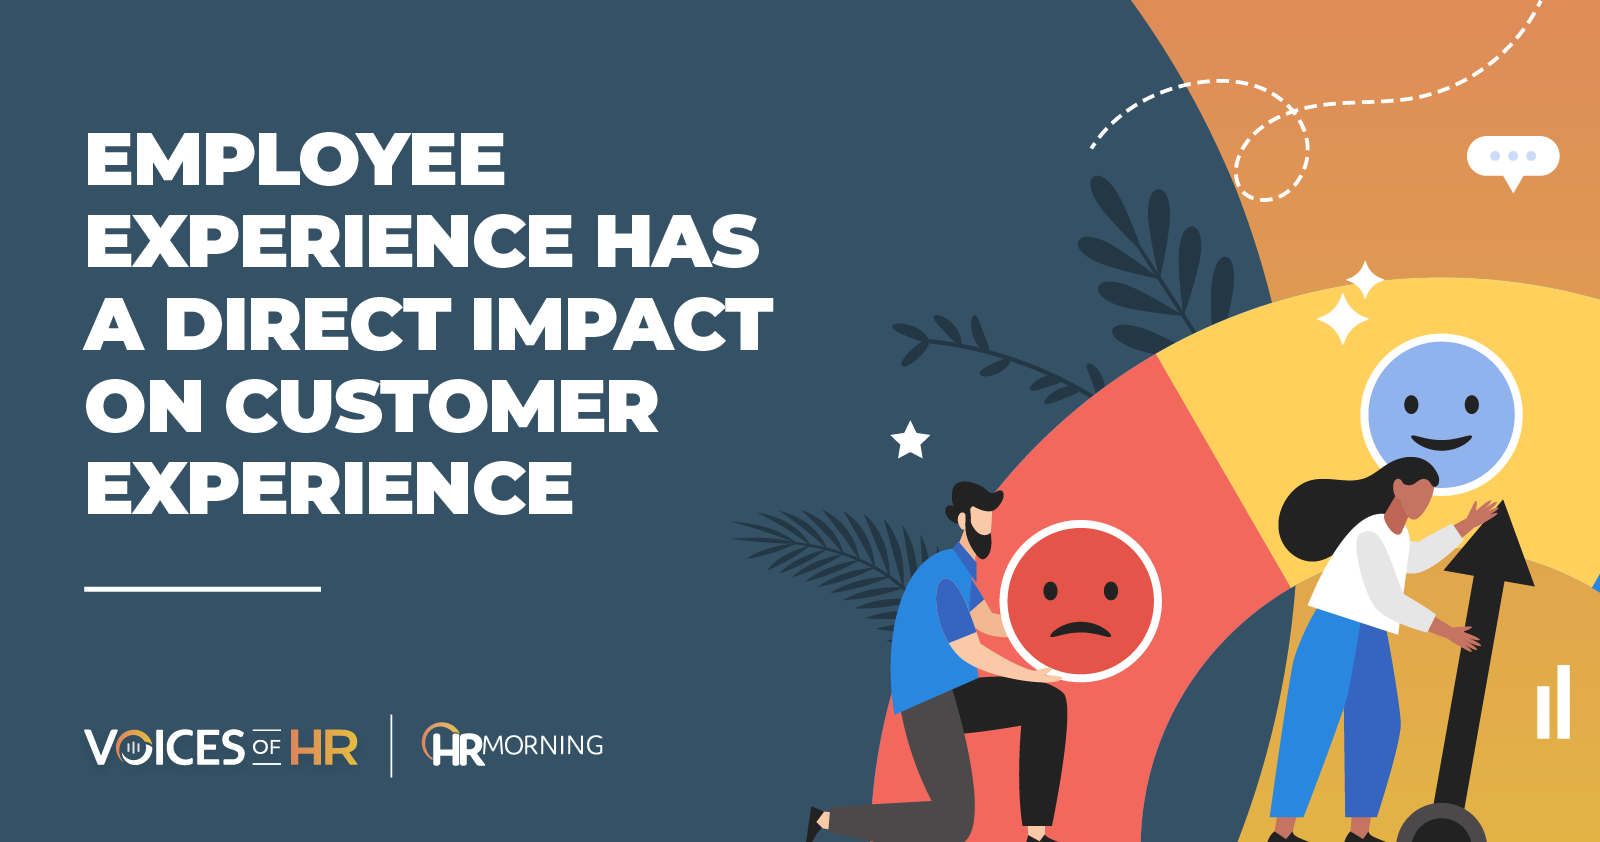 Employee experience has a direct impact on customer experience